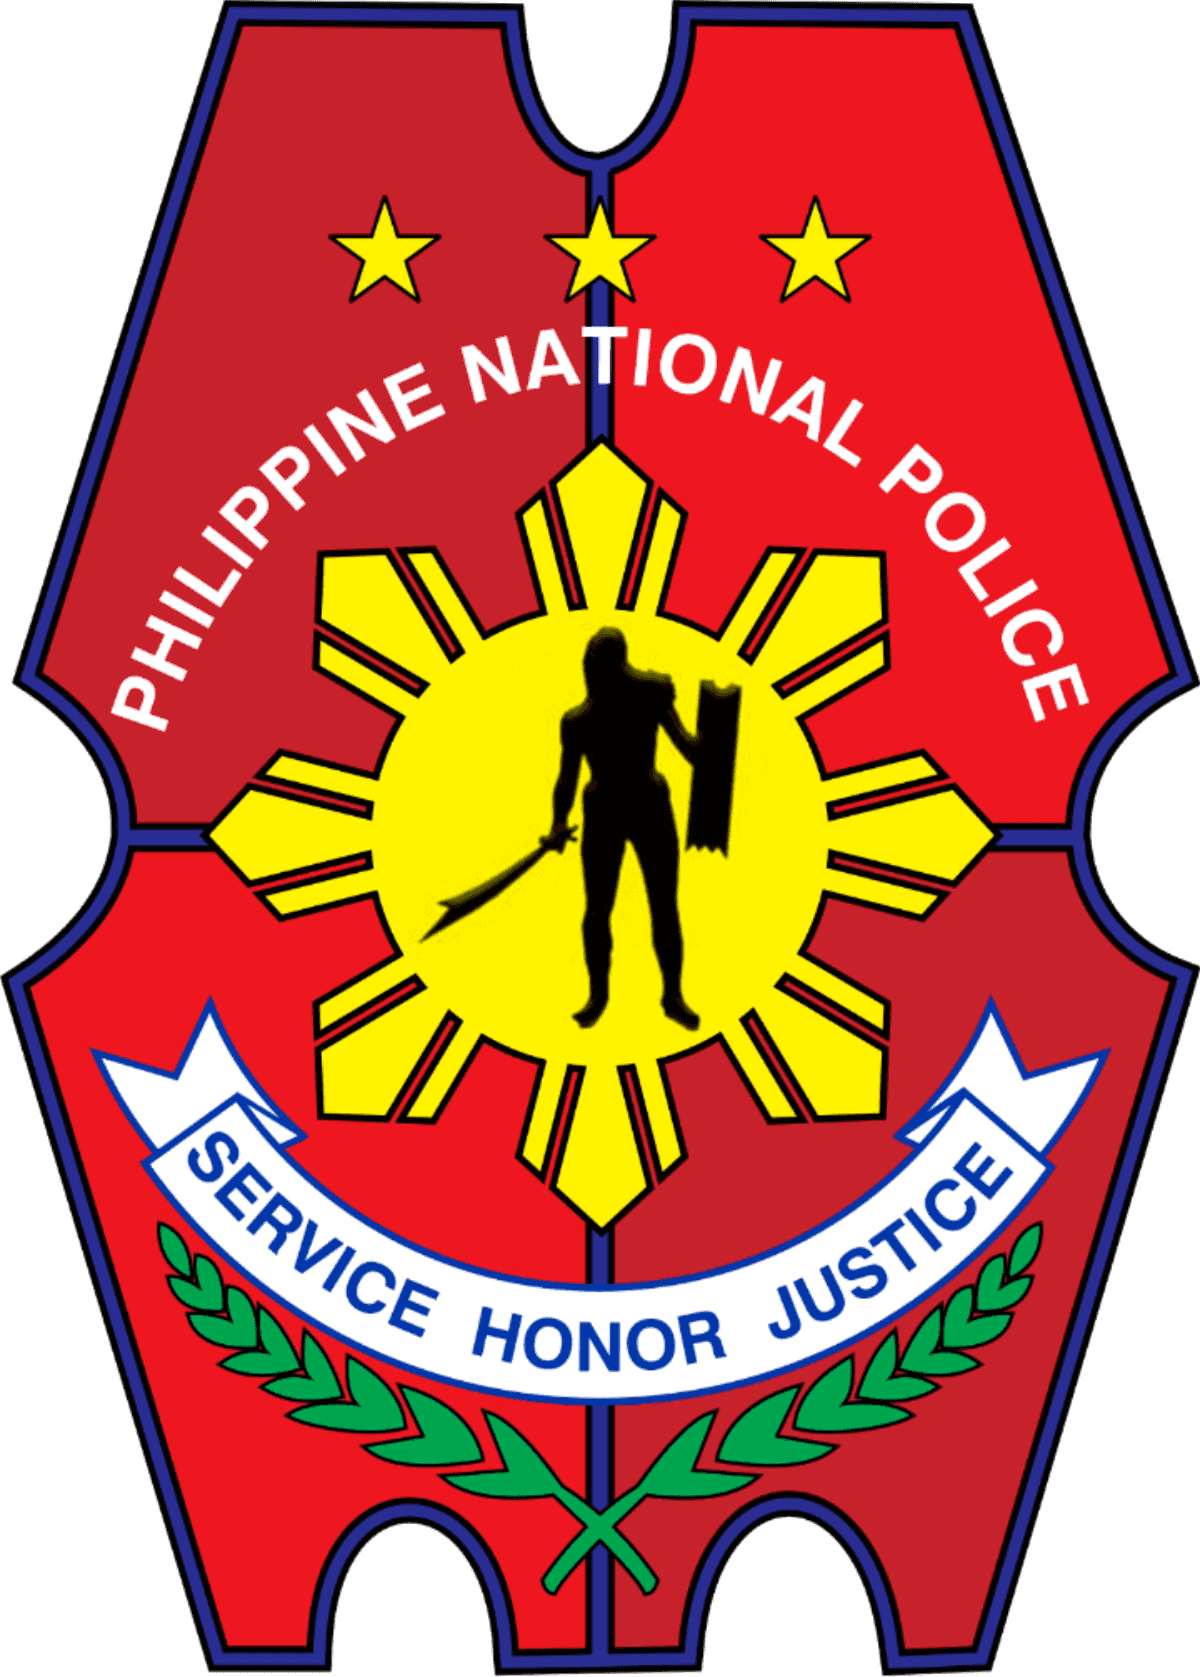 PNP 78k law offenders arrested in 2022